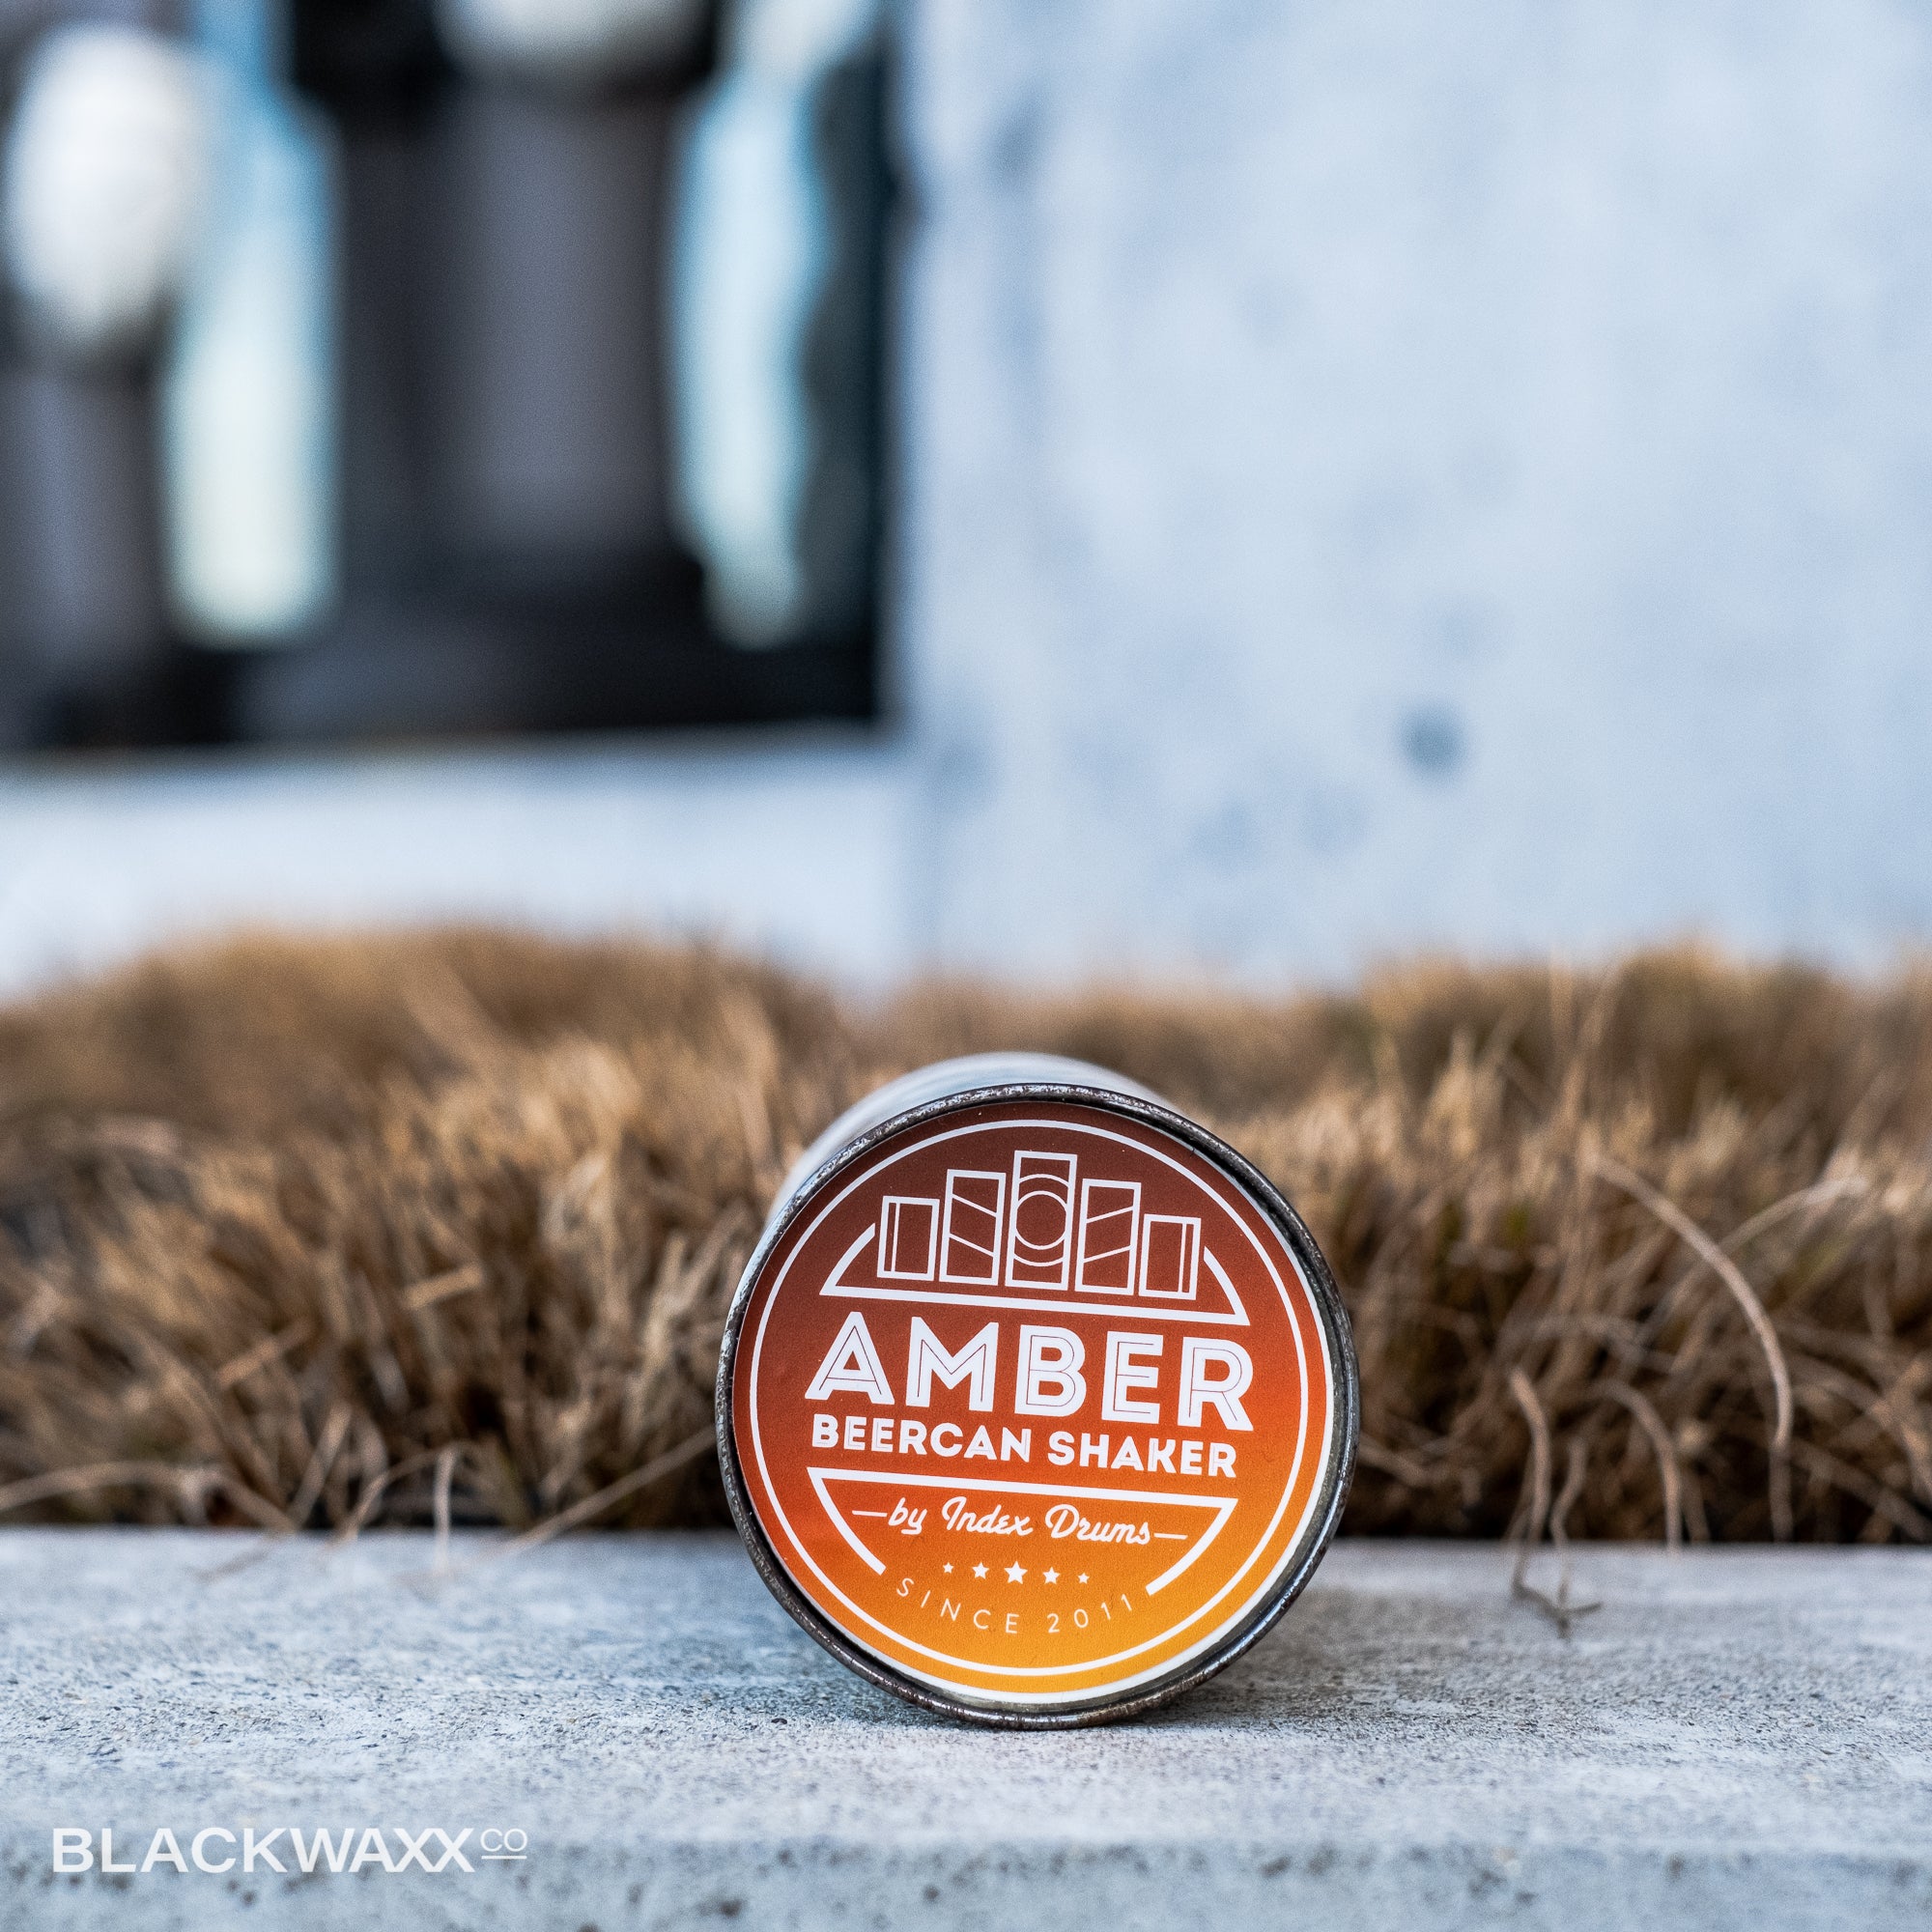 Index Shaker - Amber - Tres Equis